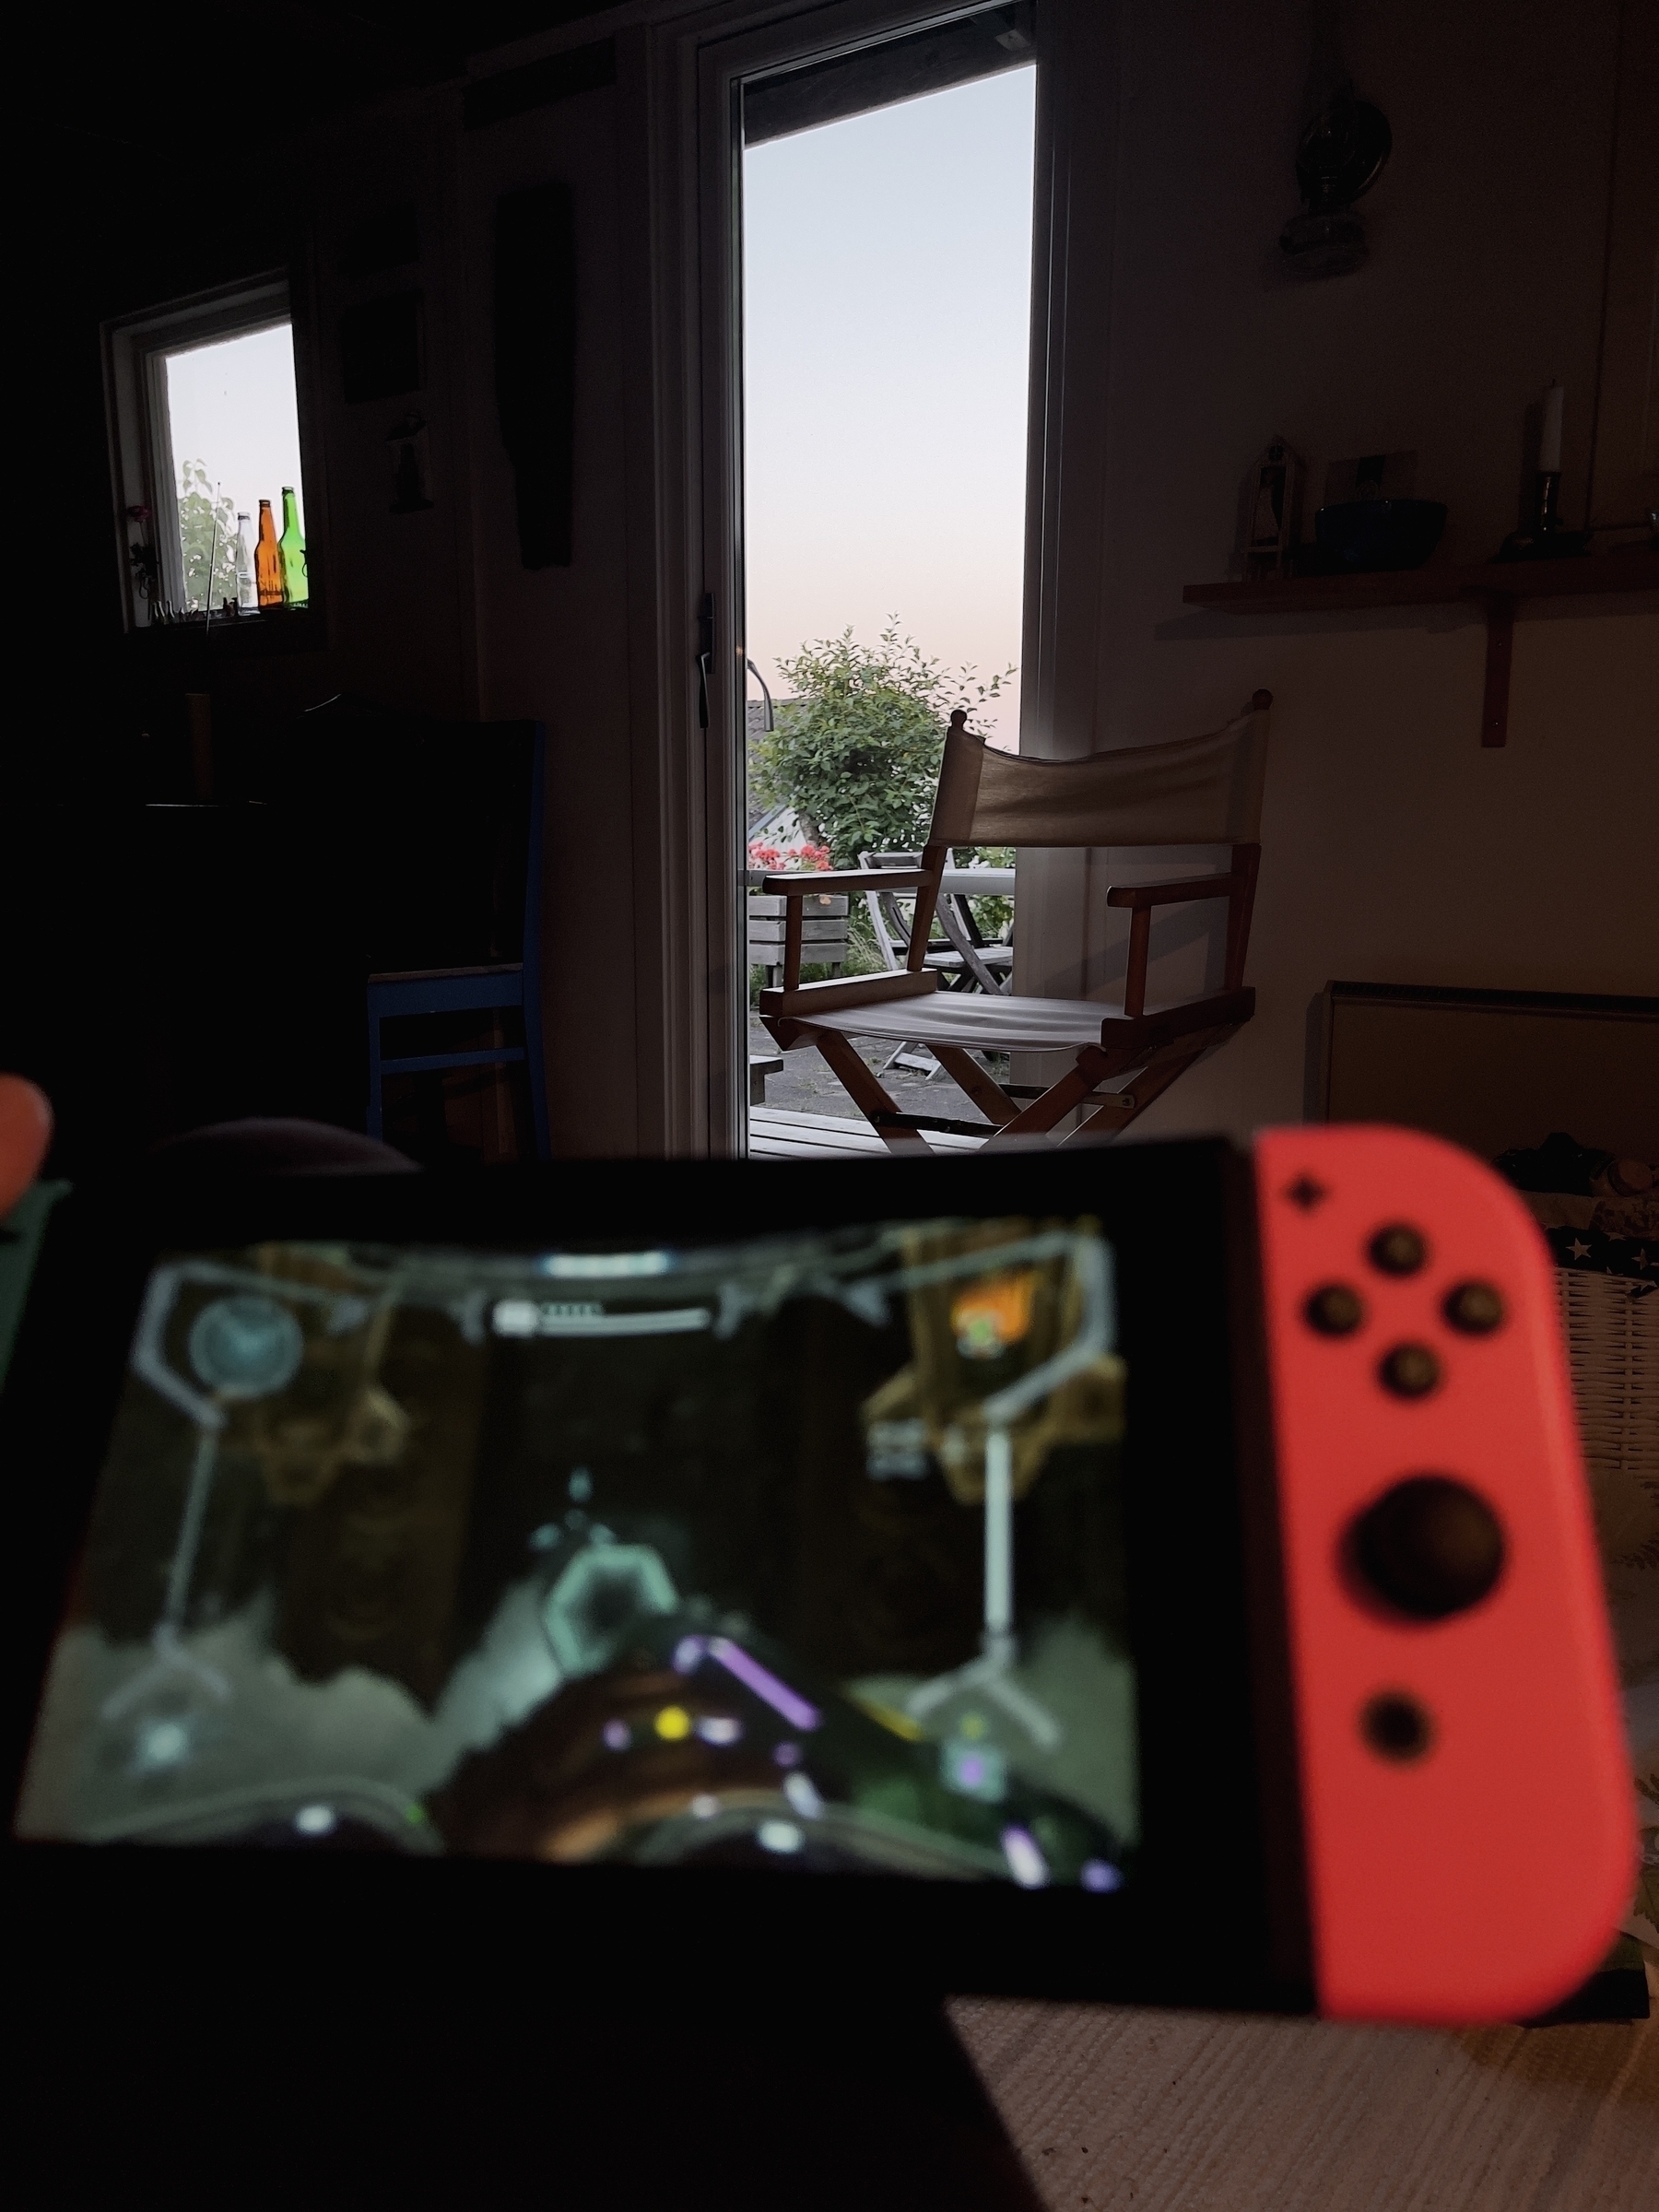 A person is playing a video game on a handheld console with a view of a porch and outdoor scenery in the background.